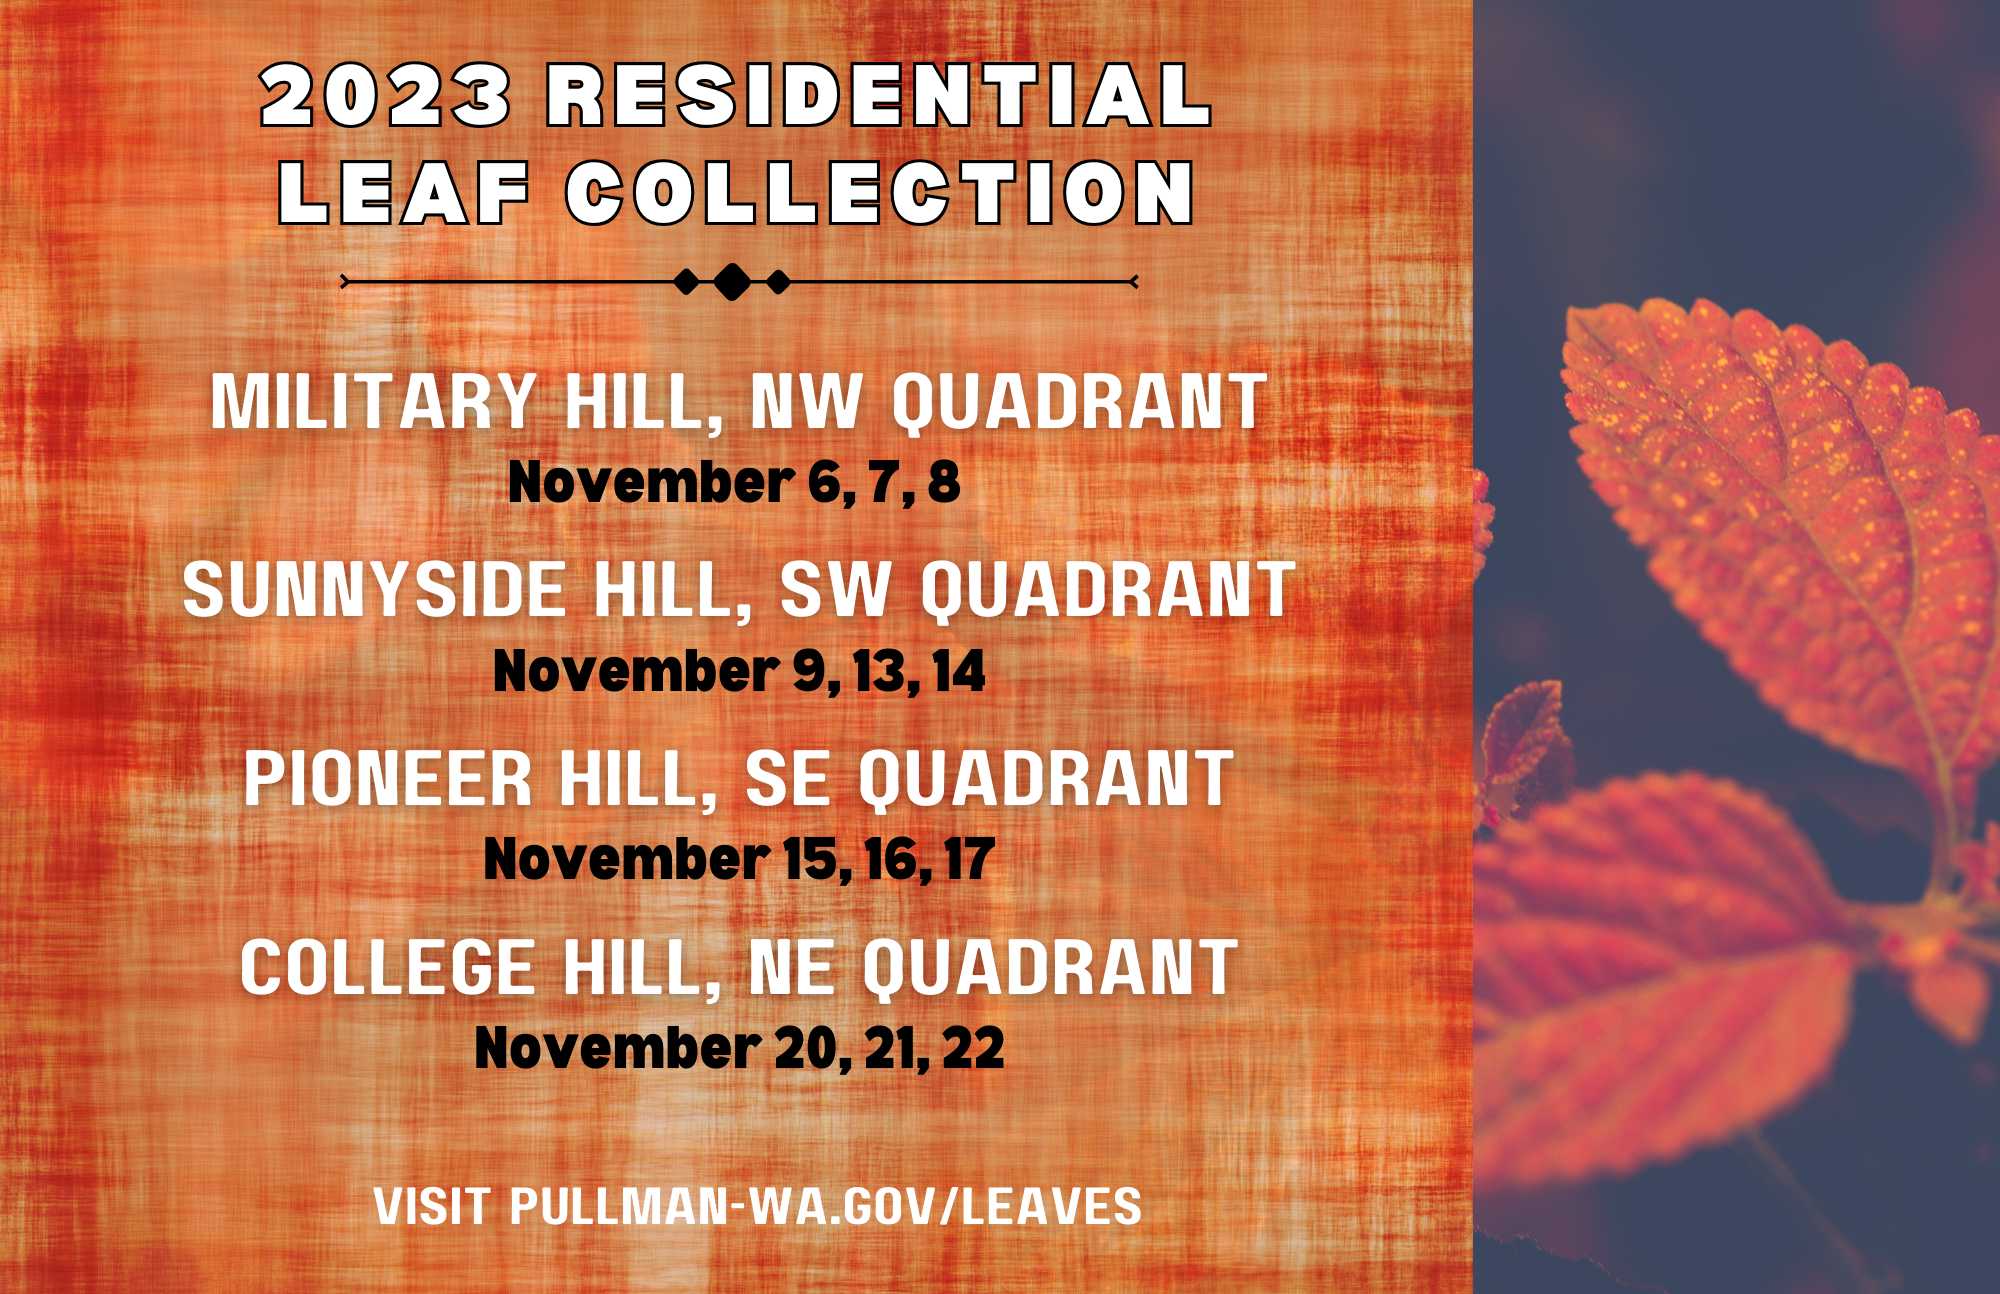 Copy of 2023LeafCollection 12 Flyer (1) - Copy